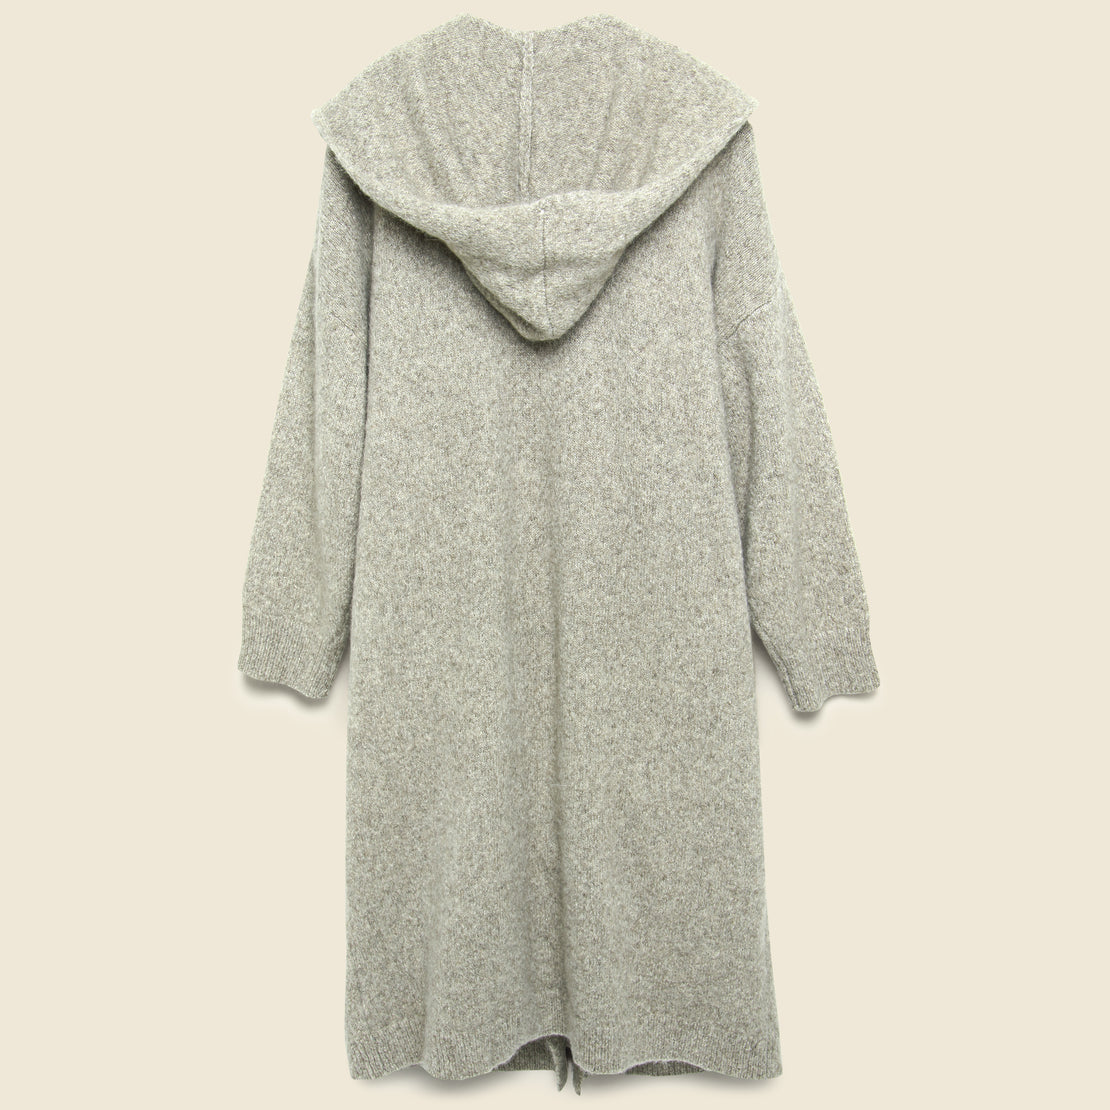 Gabrielle Sweater Coat - Taupe - Filosofia - STAG Provisions - W - Outerwear - Coat/Jacket